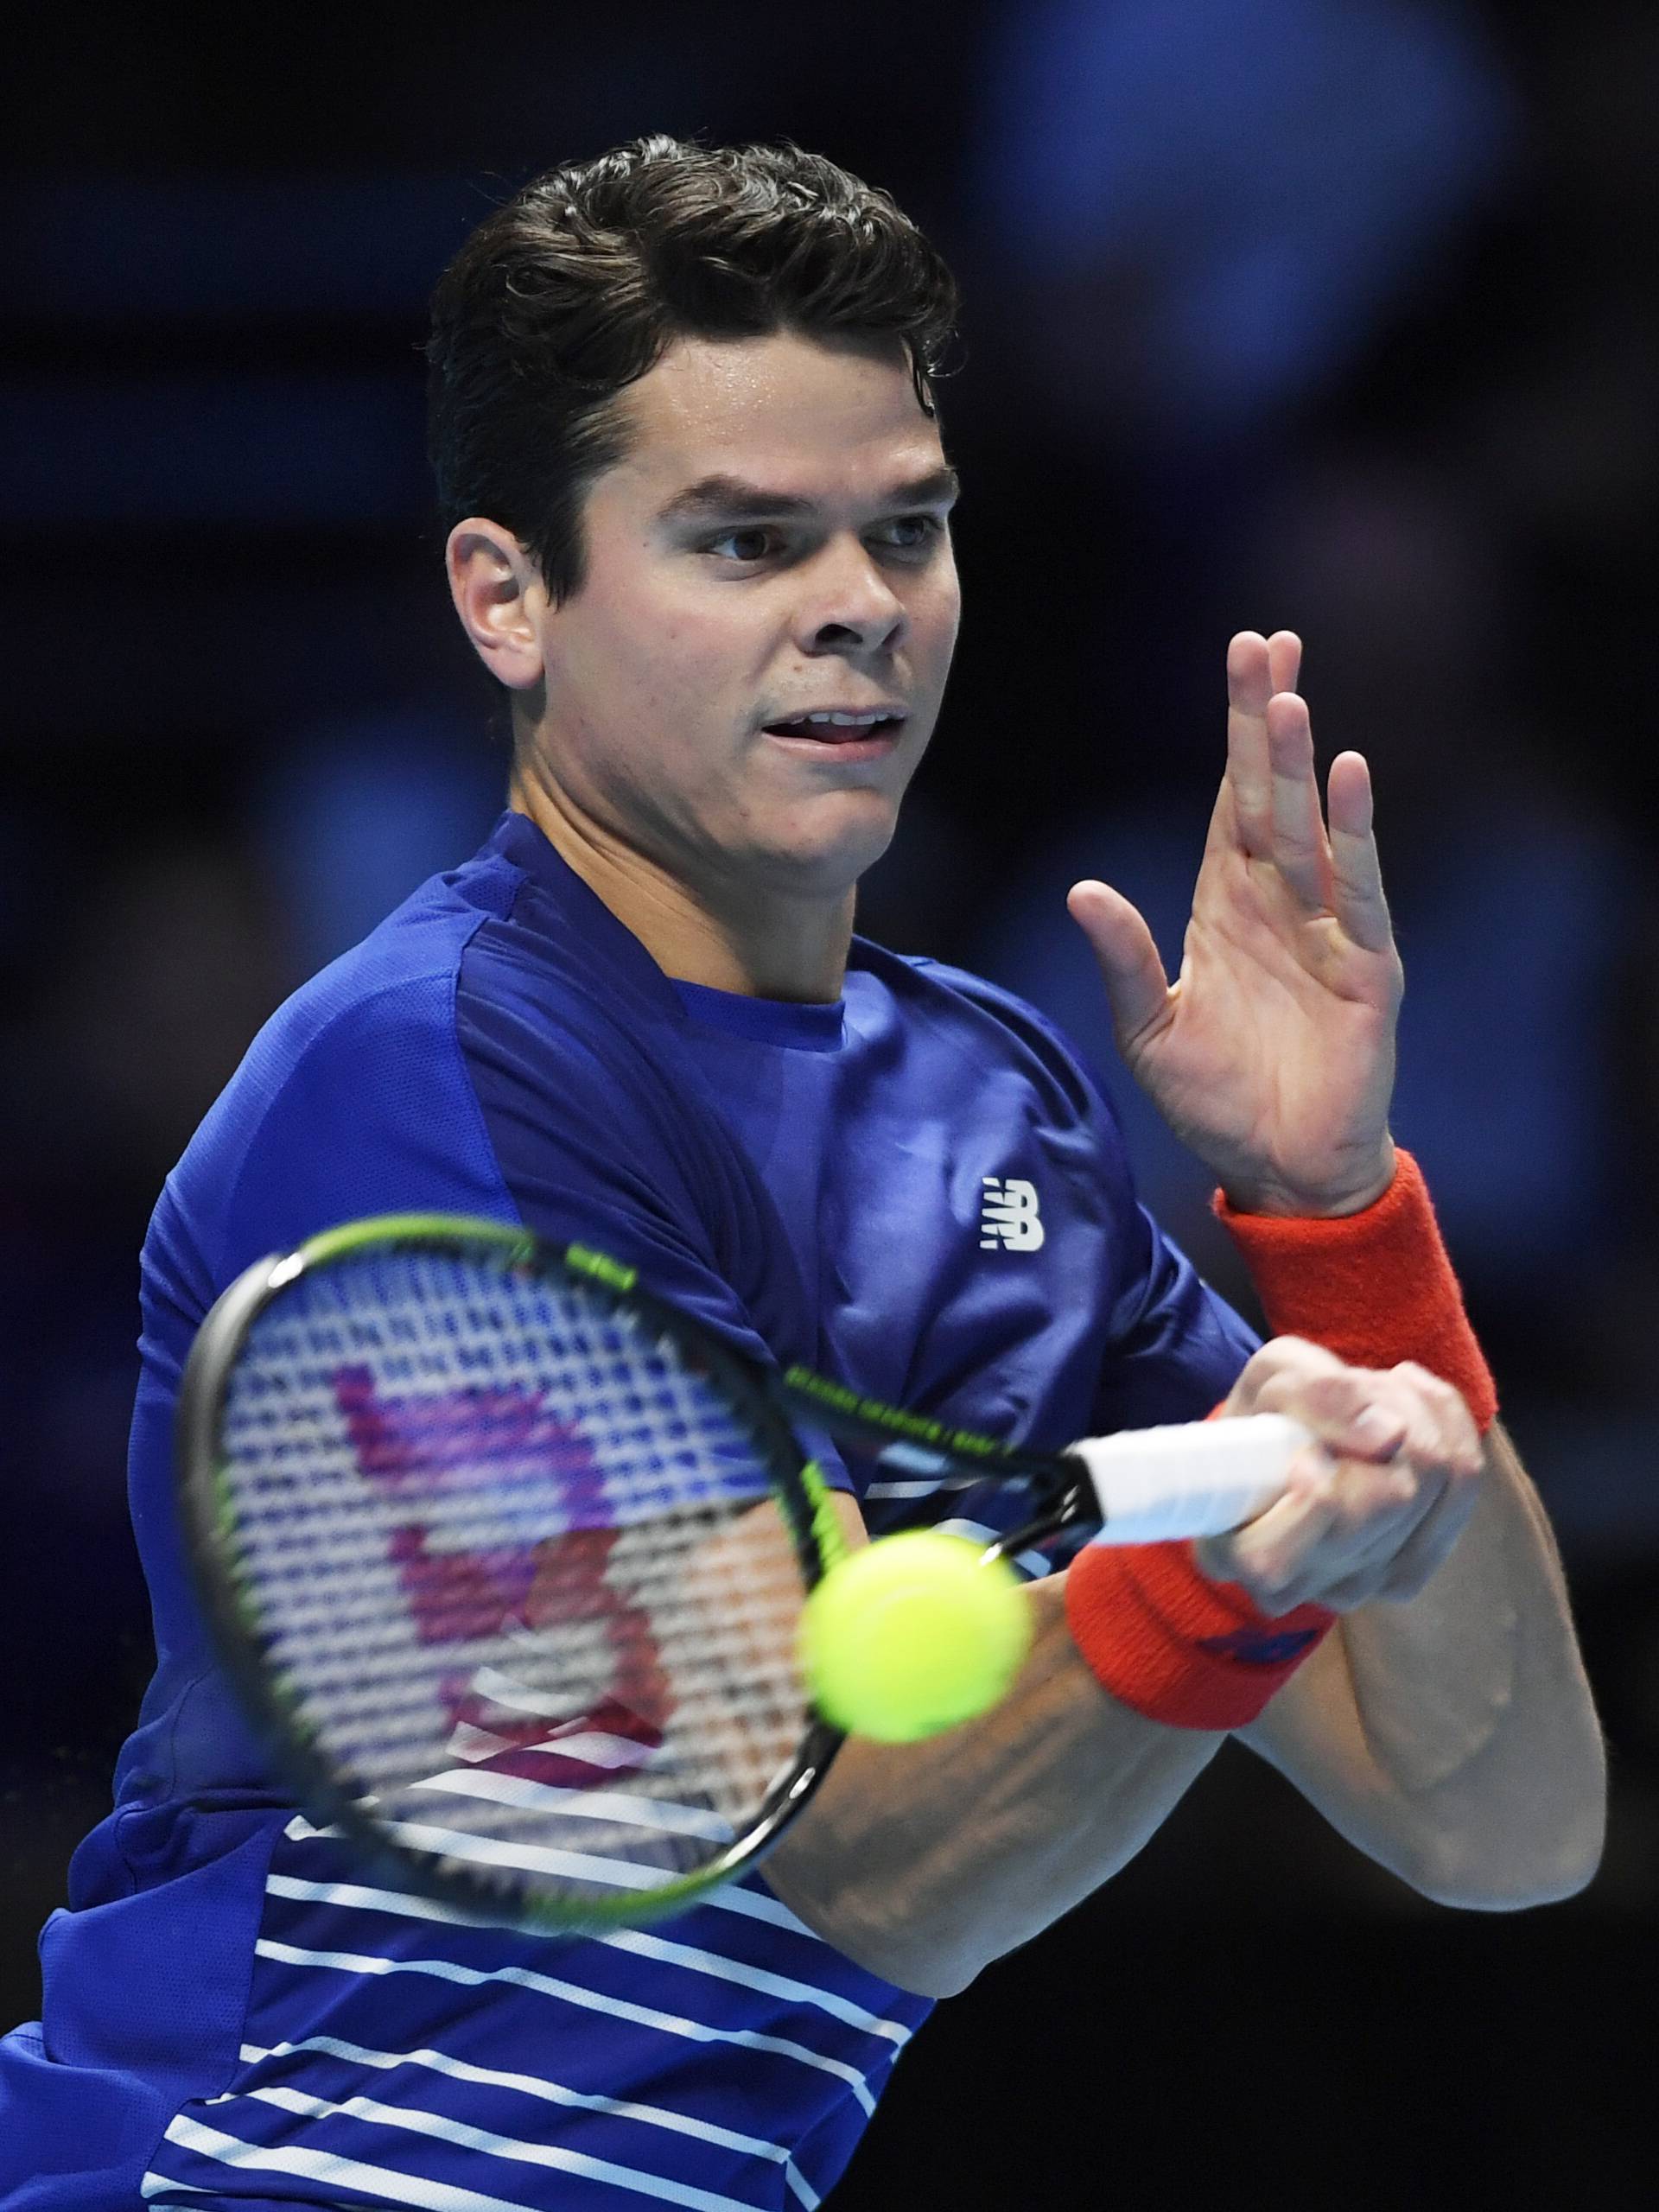 Canada's Milos Raonic in action during his round robin match with Serbia's Novak Djokovic